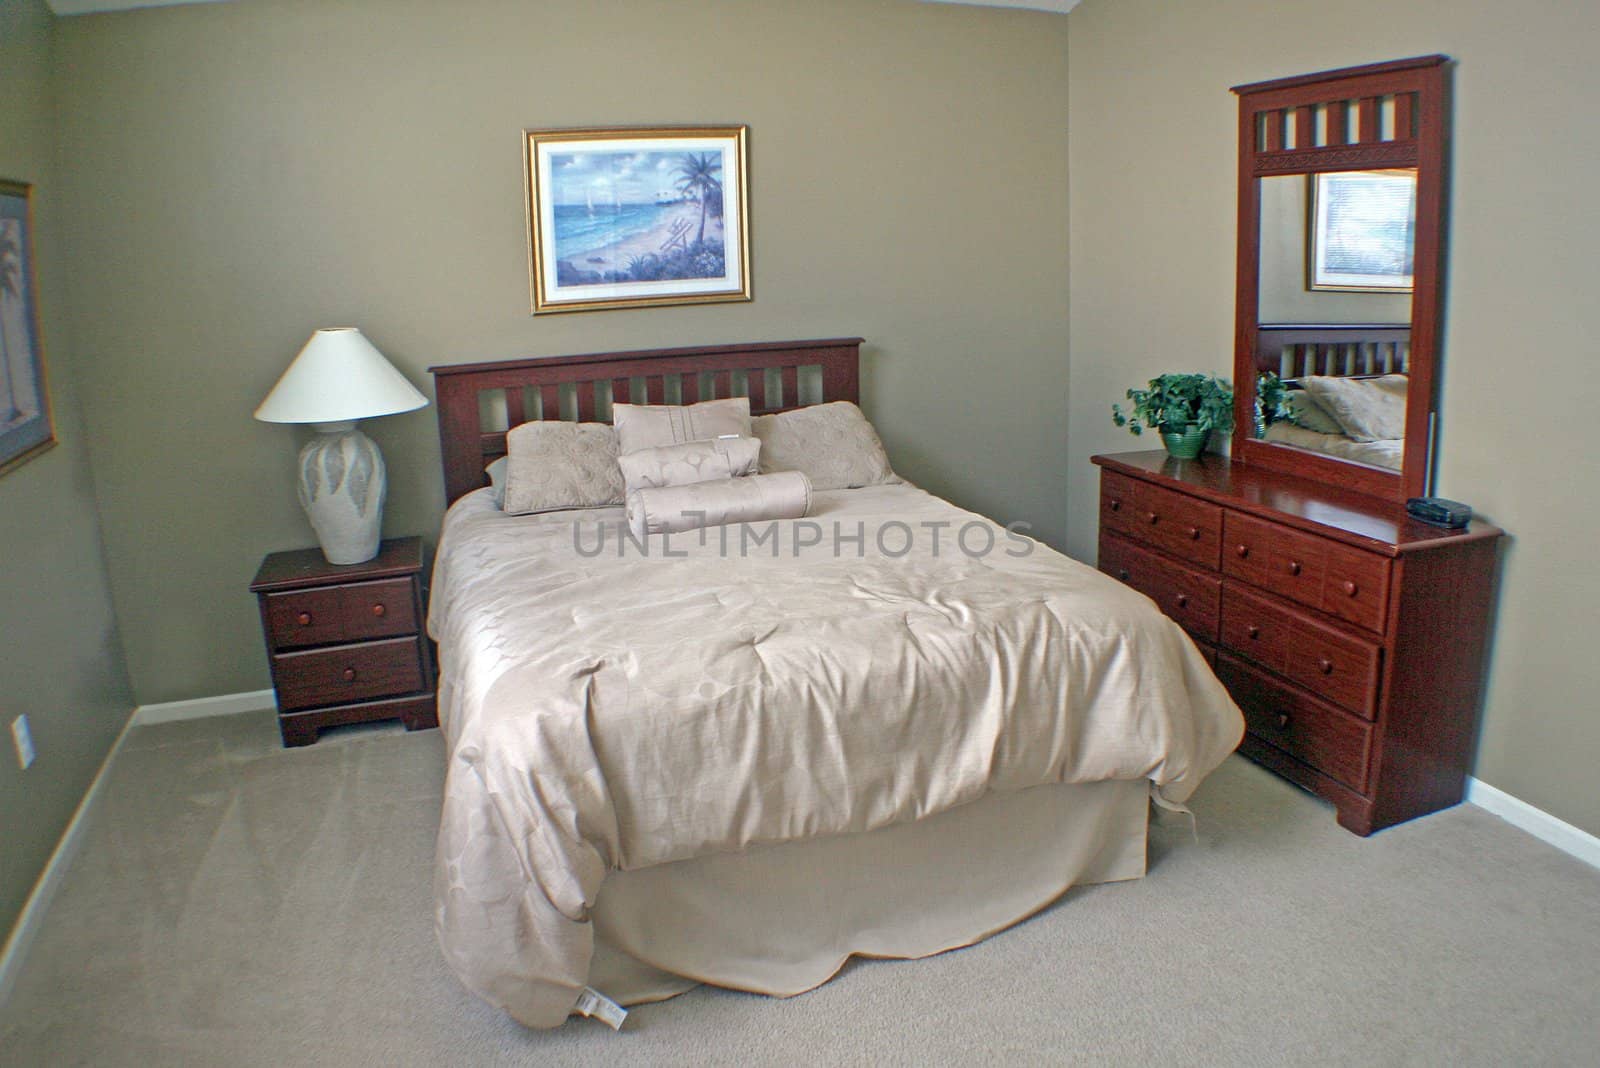 A Master Bedroom, interior shot in a home.